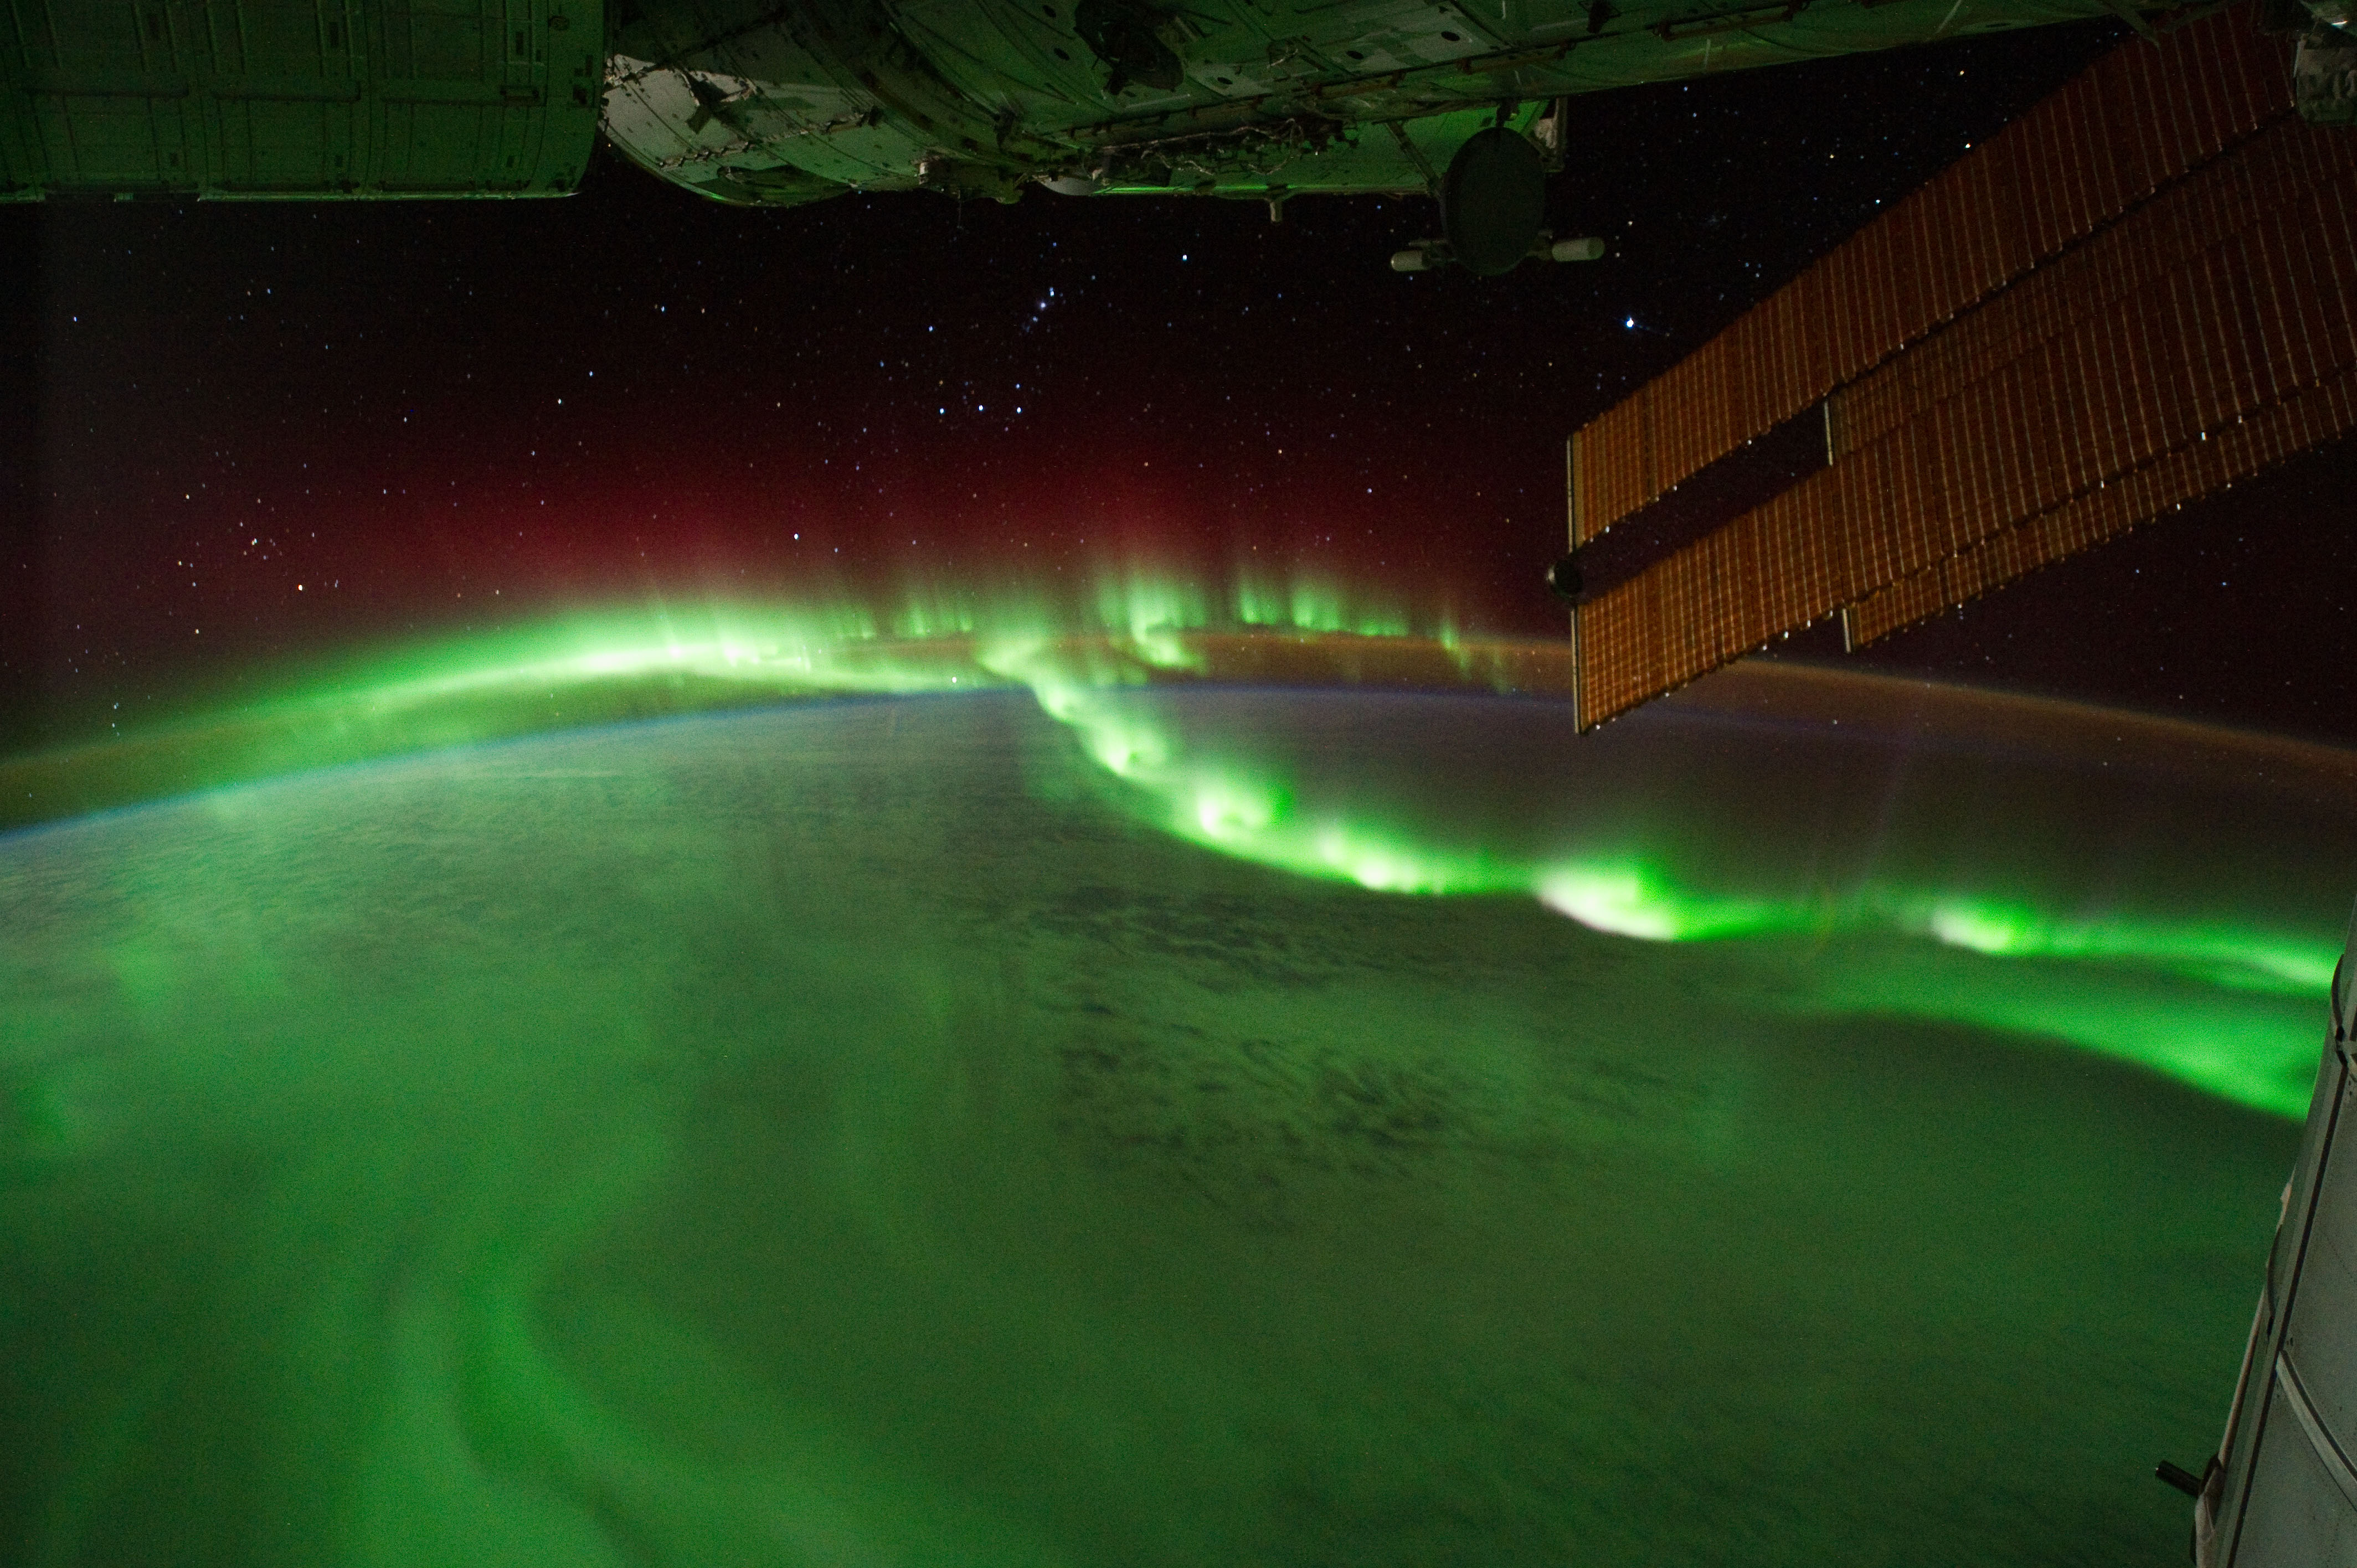 Astronaut aboard space station shares video of stunning aurora borealis